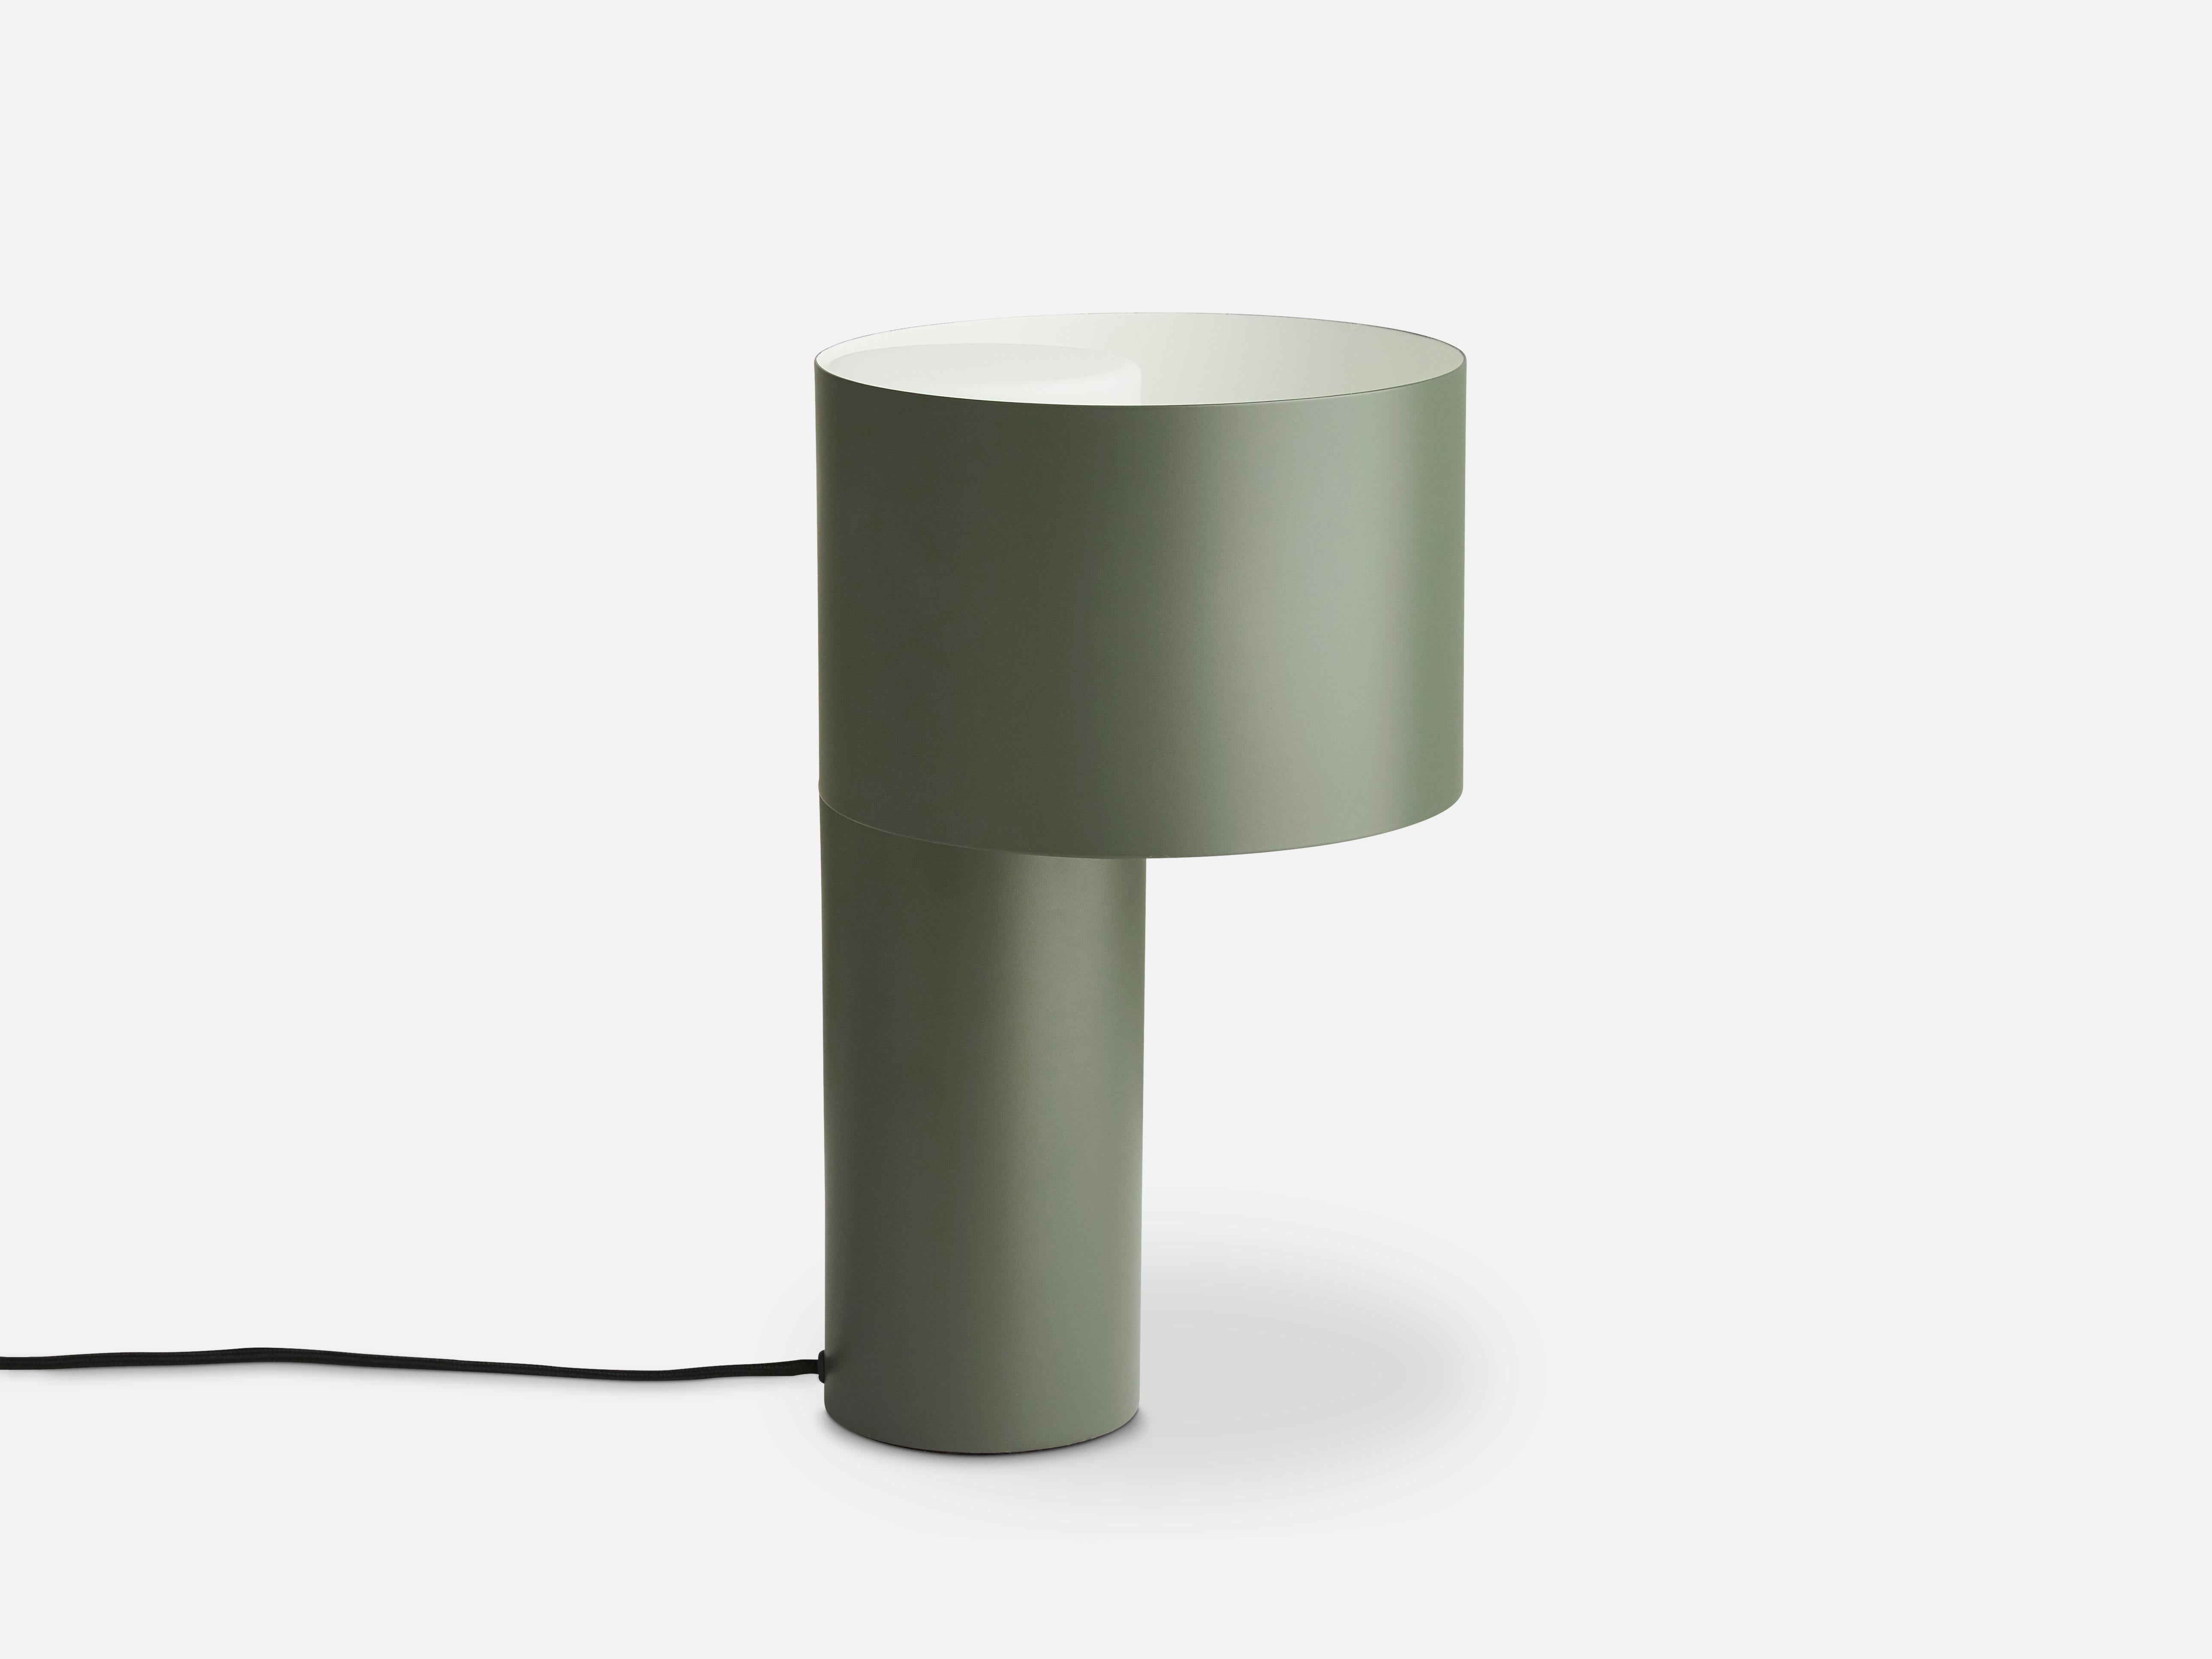 Green tangent table lamp by Frederik Kurzweg.
Materials: Metal, glass.
Dimensions: D 20 x H 34 cm.
Available in Forest green, desert sand and cool grey.

Frederik Kurzweg is an upcoming design talent born in Germany. His background as a trained